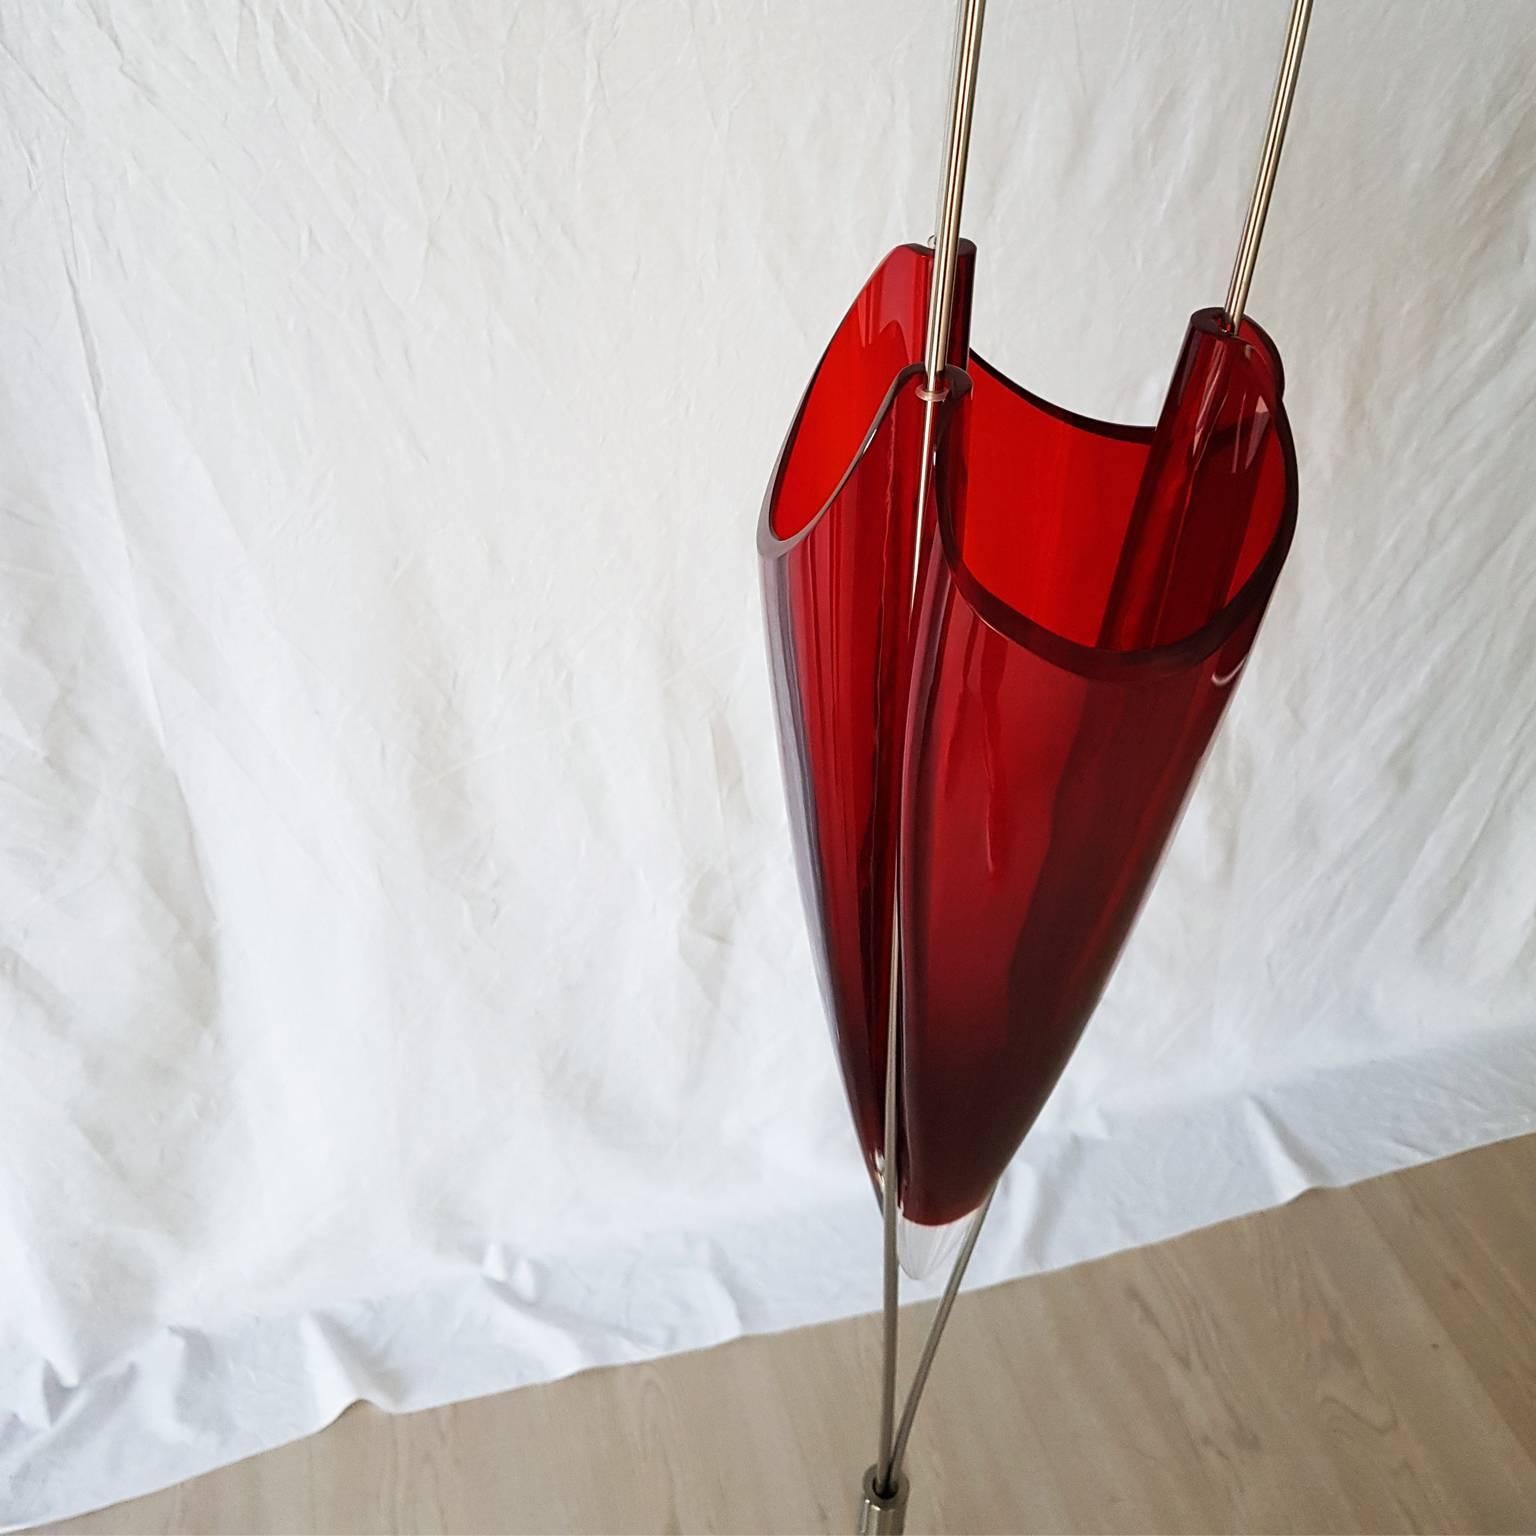 Zande vase was designed by David Palterer in the 1995 for Zanotta, Italian manufacturer.
The red signed vase is in blown Murano glass made by skilled glassblowers.
It is supported by a satin-finished stainless steel holder with polish rods.
The